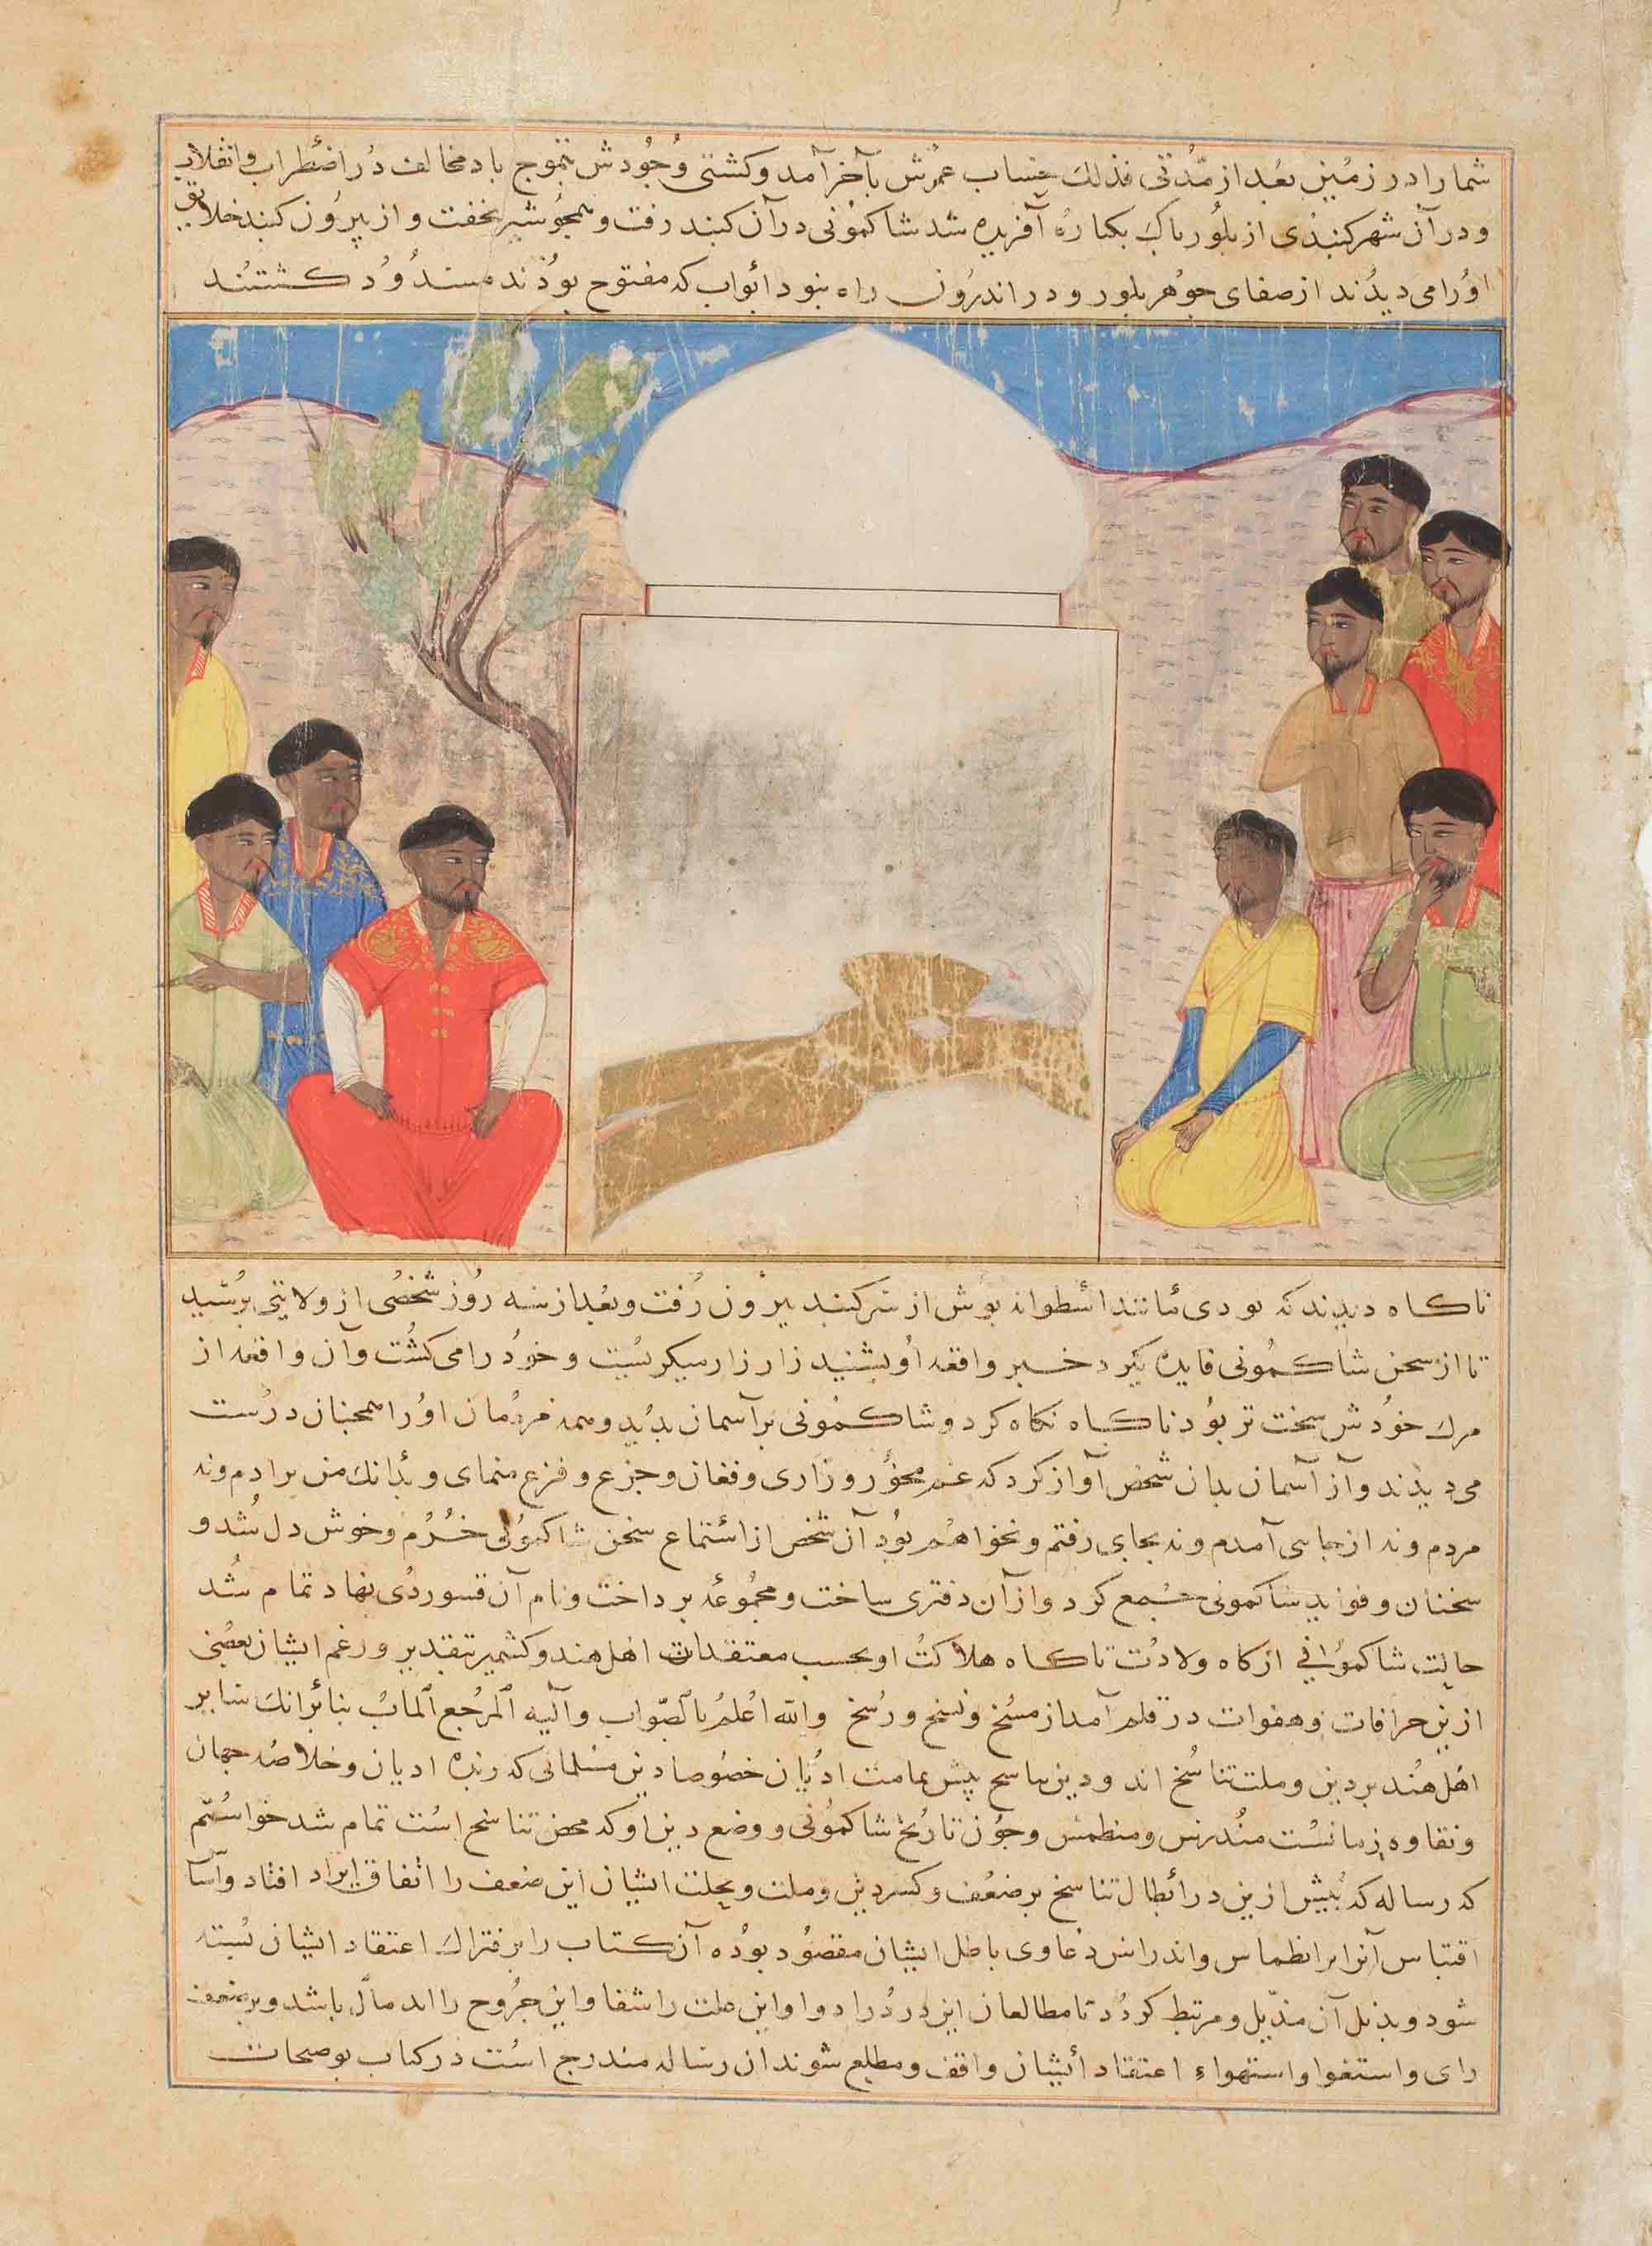 A 15th-century leaf, The Appearance of Shakyamuni (the Buddha) after His Death, from a manuscript of the Majma al- Tavarikh (Compendium of Chronicles) by Hafiz- i Abru, Herat, Afghanistan Courtesy of the Los Angeles County Museum of Art